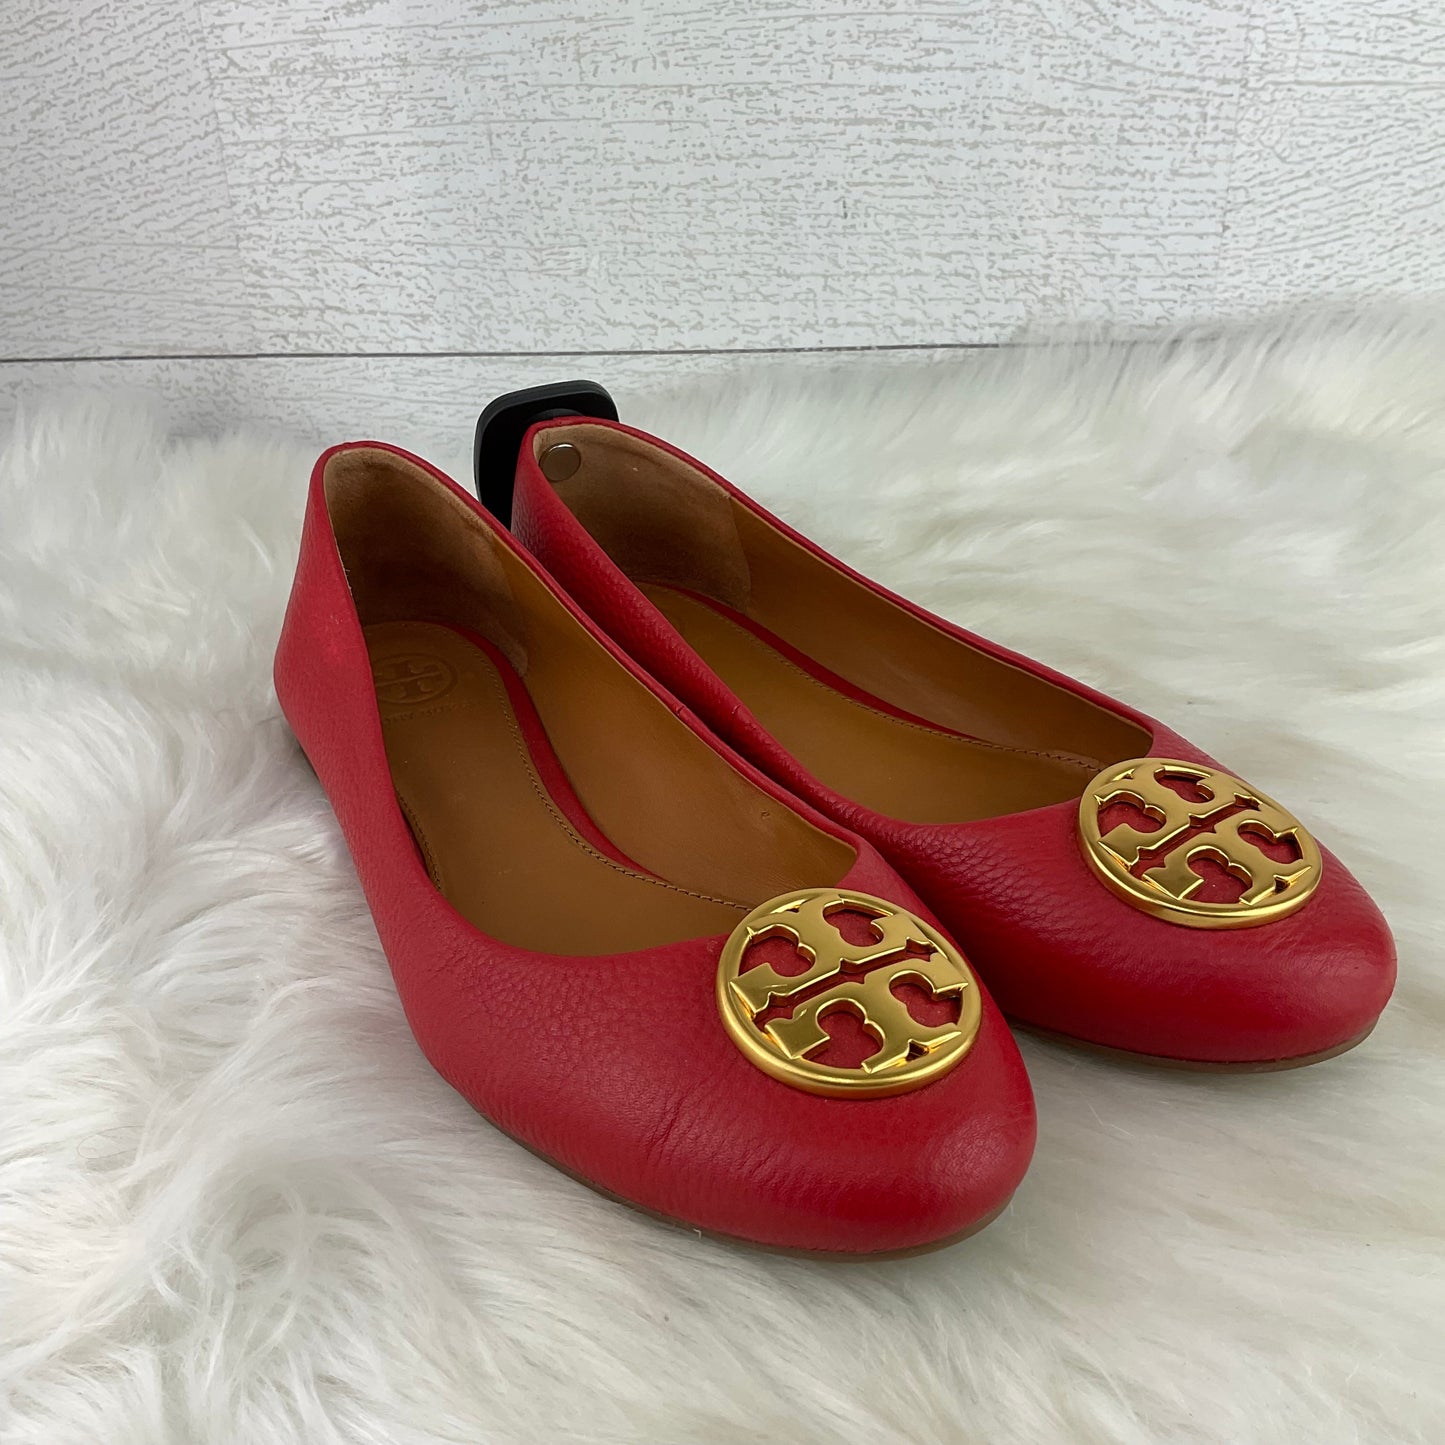 Red Sandals Designer Tory Burch, Size 7.5